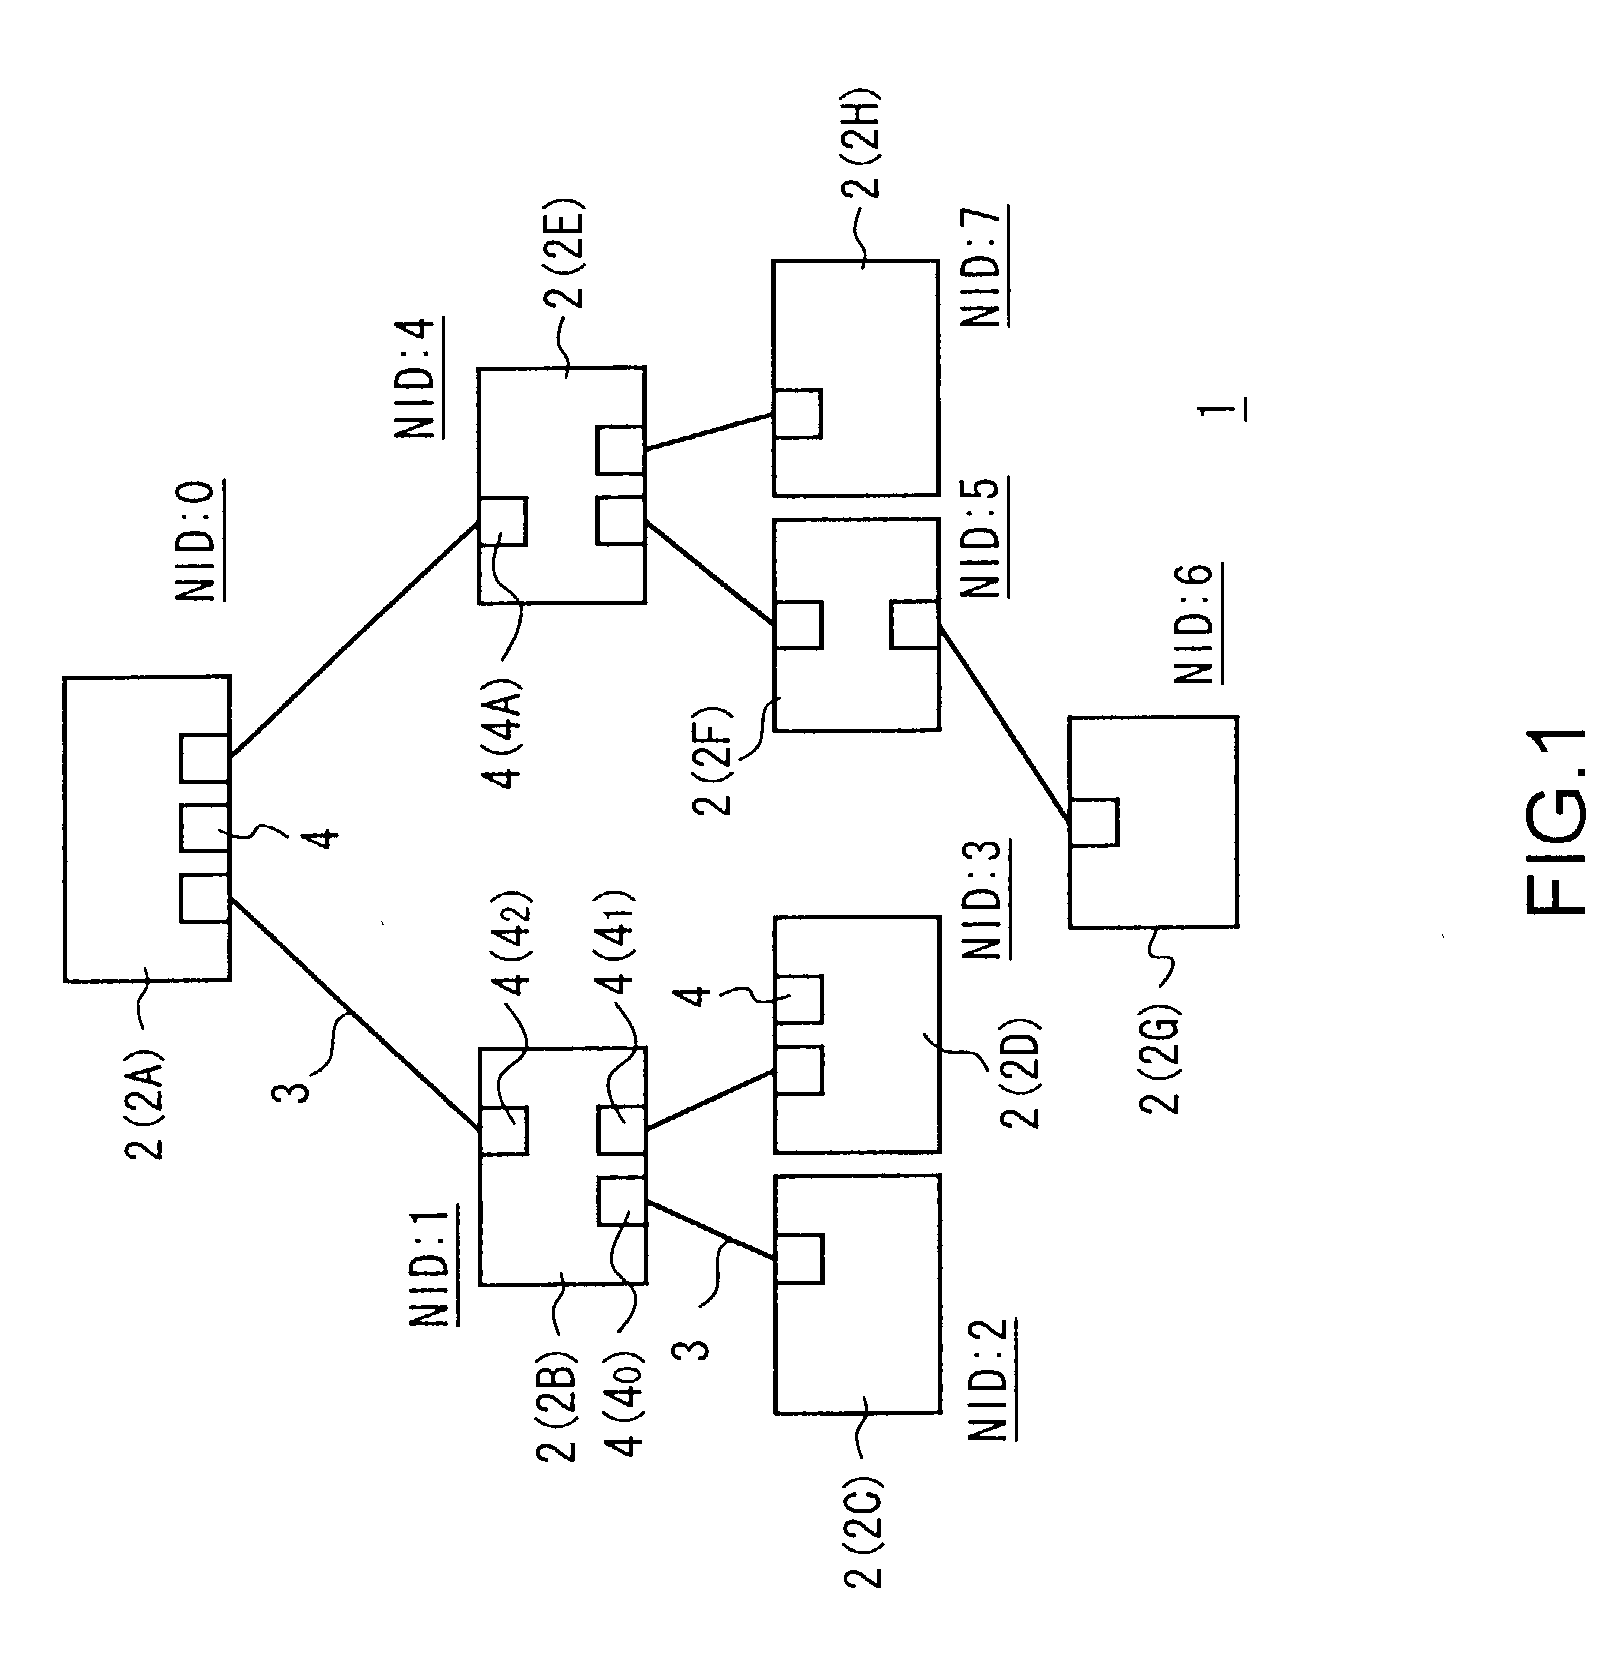 Network system, addressing method, communication control device and method thereof